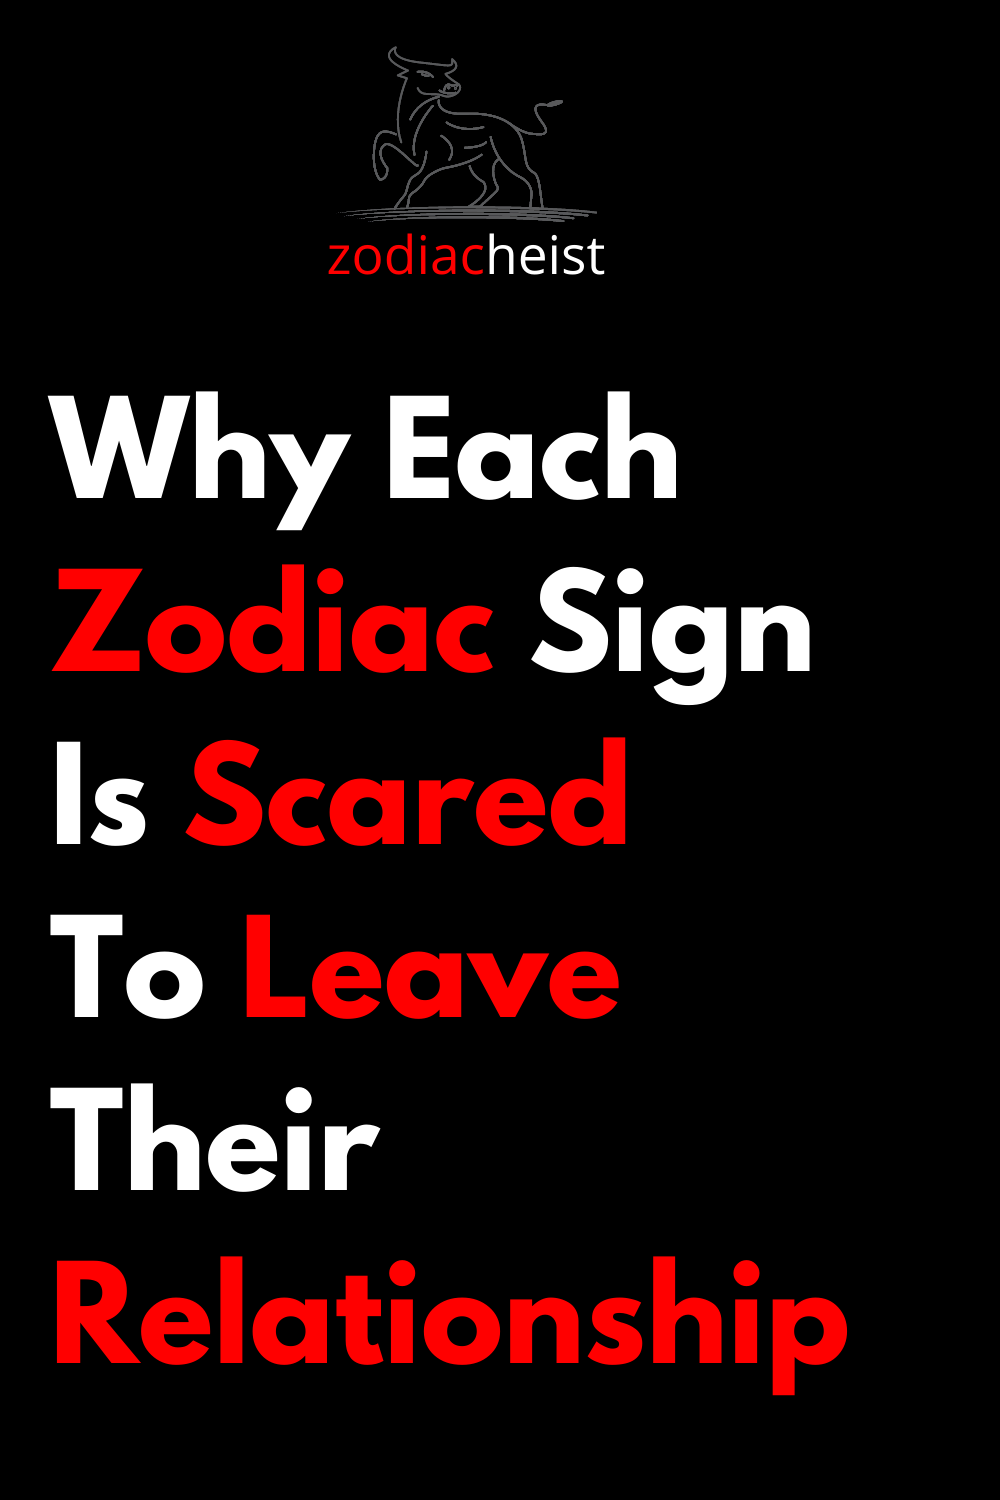 Why Each Zodiac Sign Is Scared To Leave Their Relationship